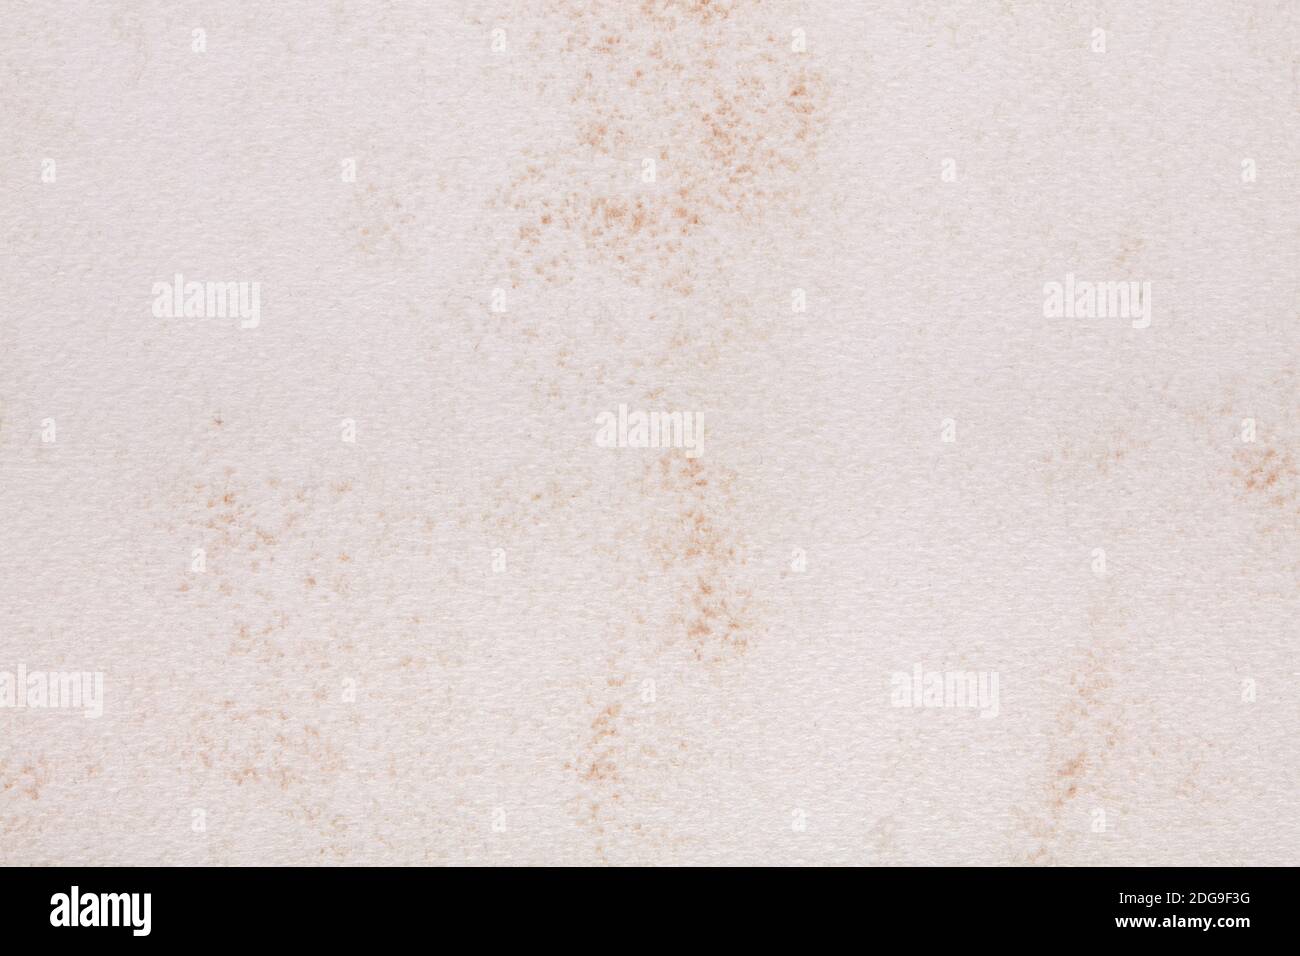 Old, rough paper texture background Stock Photo